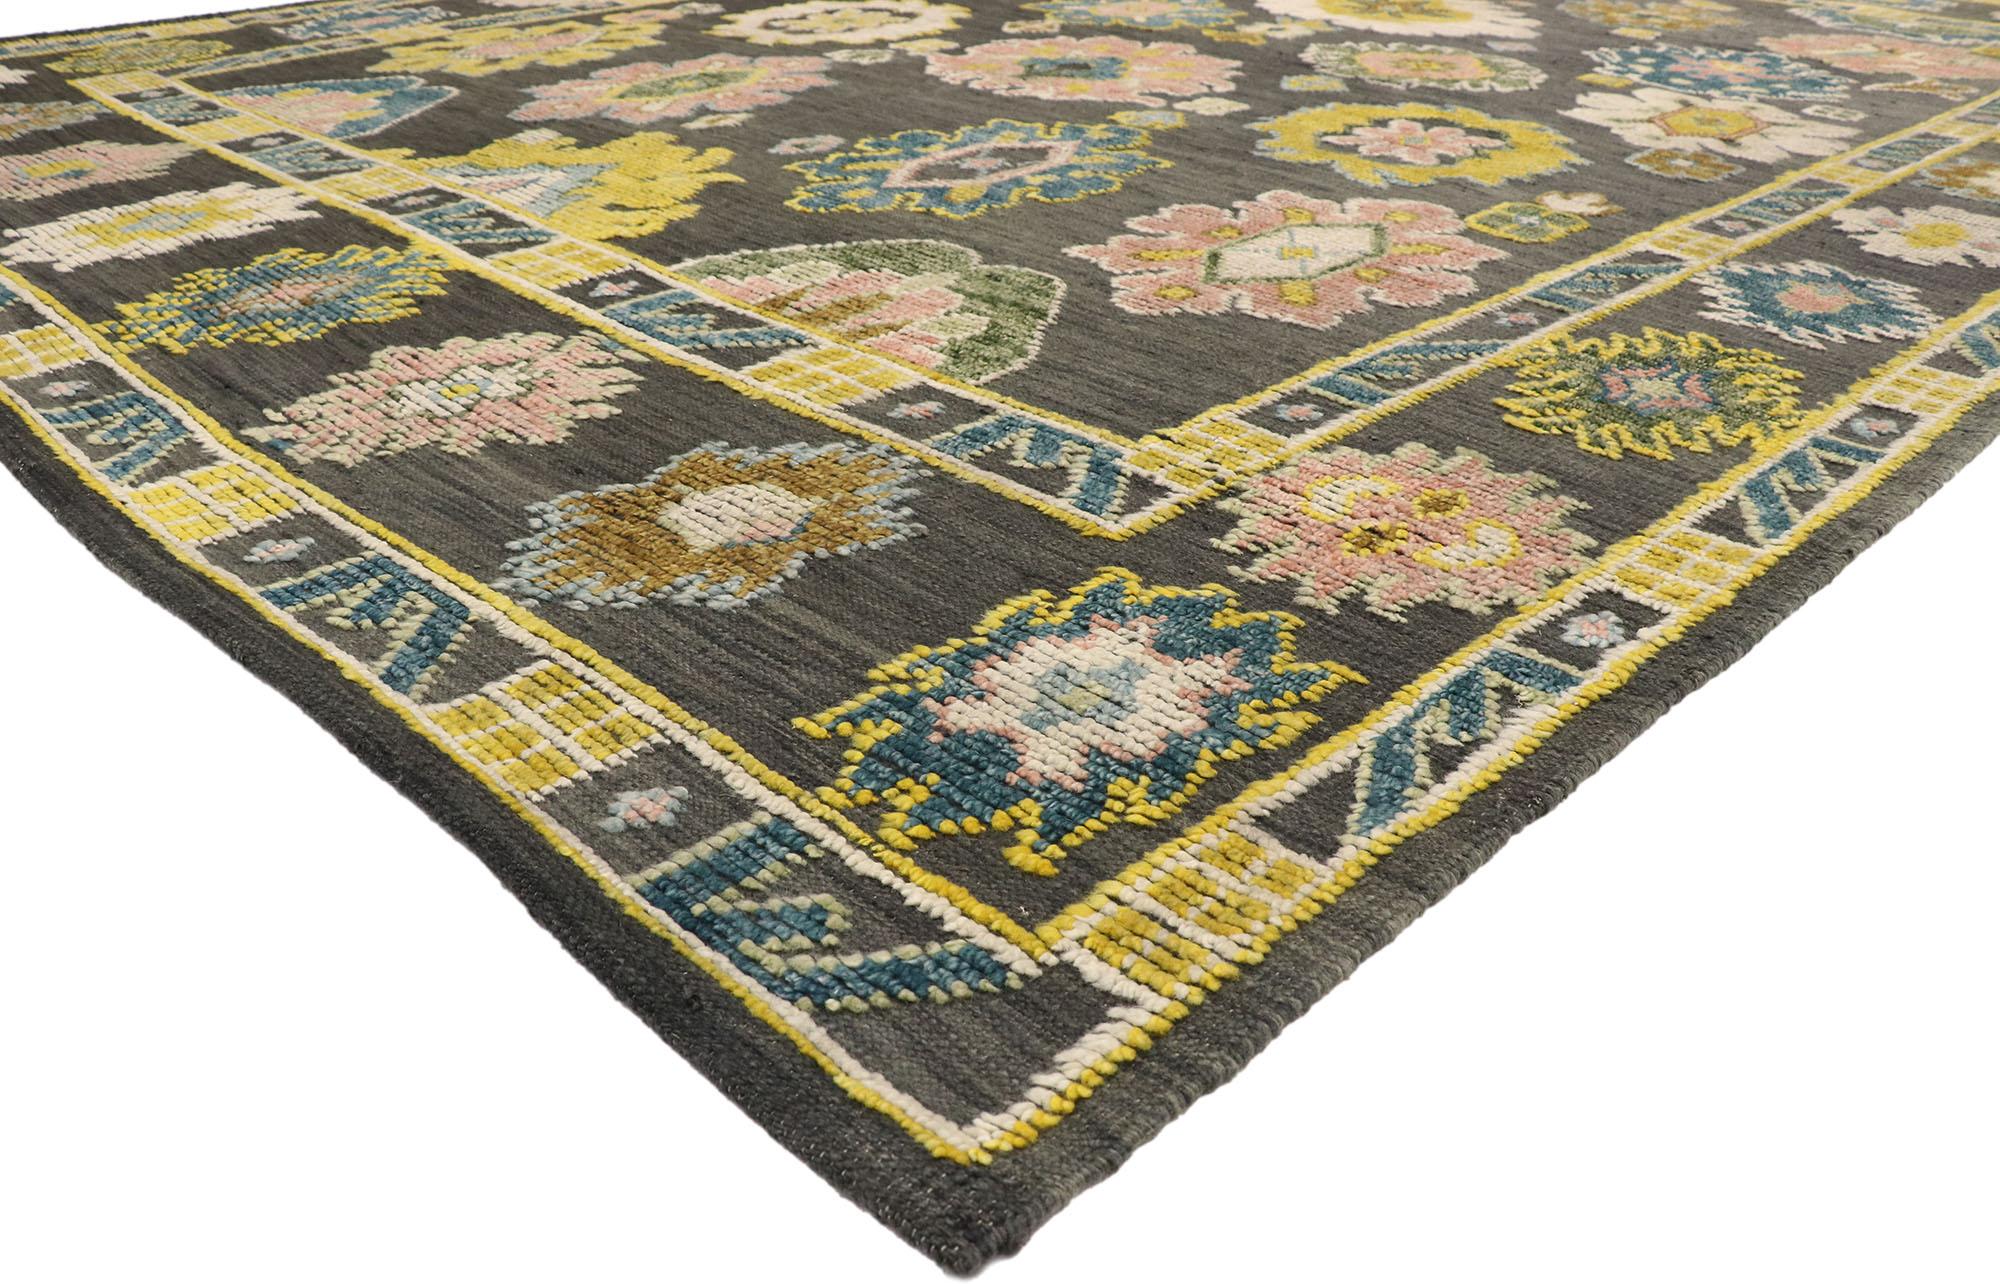 30517 New Oushak High-Low Rug, 10'06 x 13'06. Showcasing a raised design with incredible detail and texture, this Oushak high-low rug is a captivating vision of woven beauty. The geometric pattern and lively colorway woven into this piece work